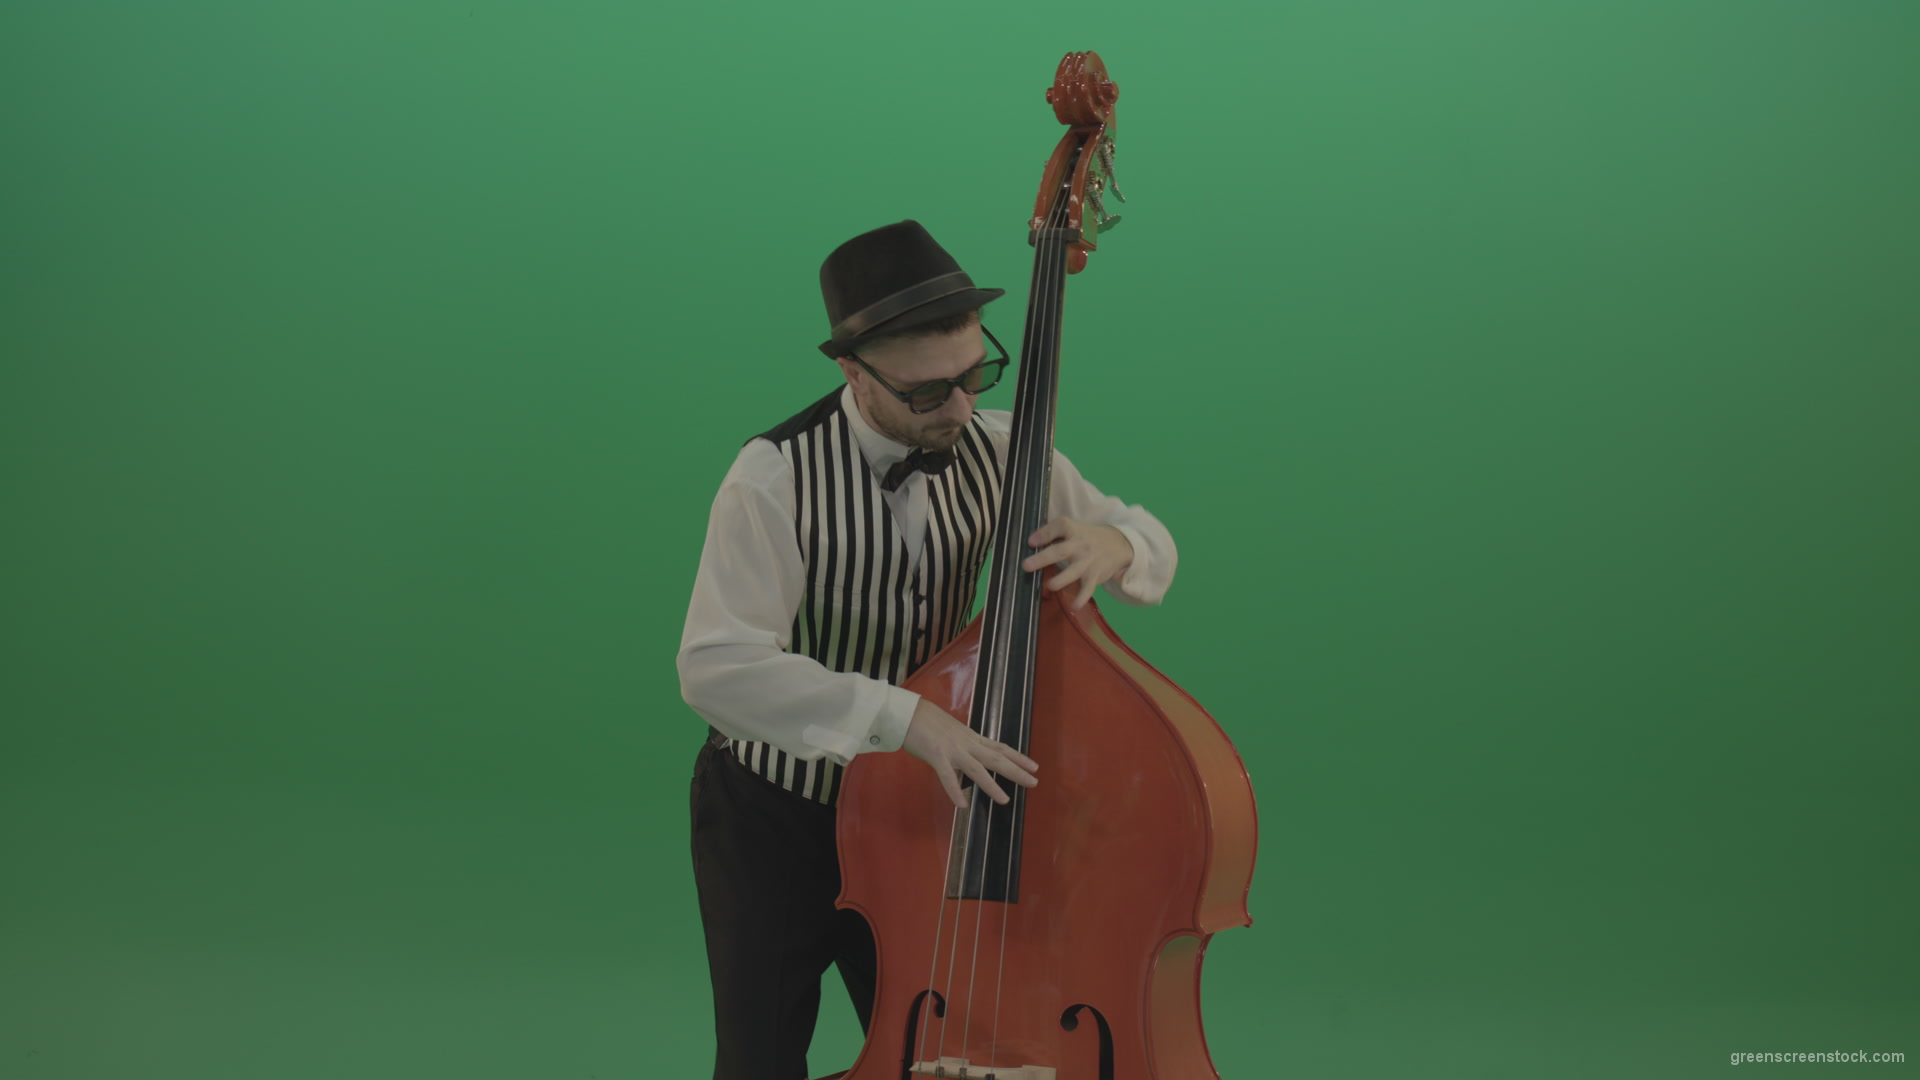 Virtuoso-man-playing-jazz-on-double-bass-String-music-instrument-isolated-on-green-screen_008 Green Screen Stock